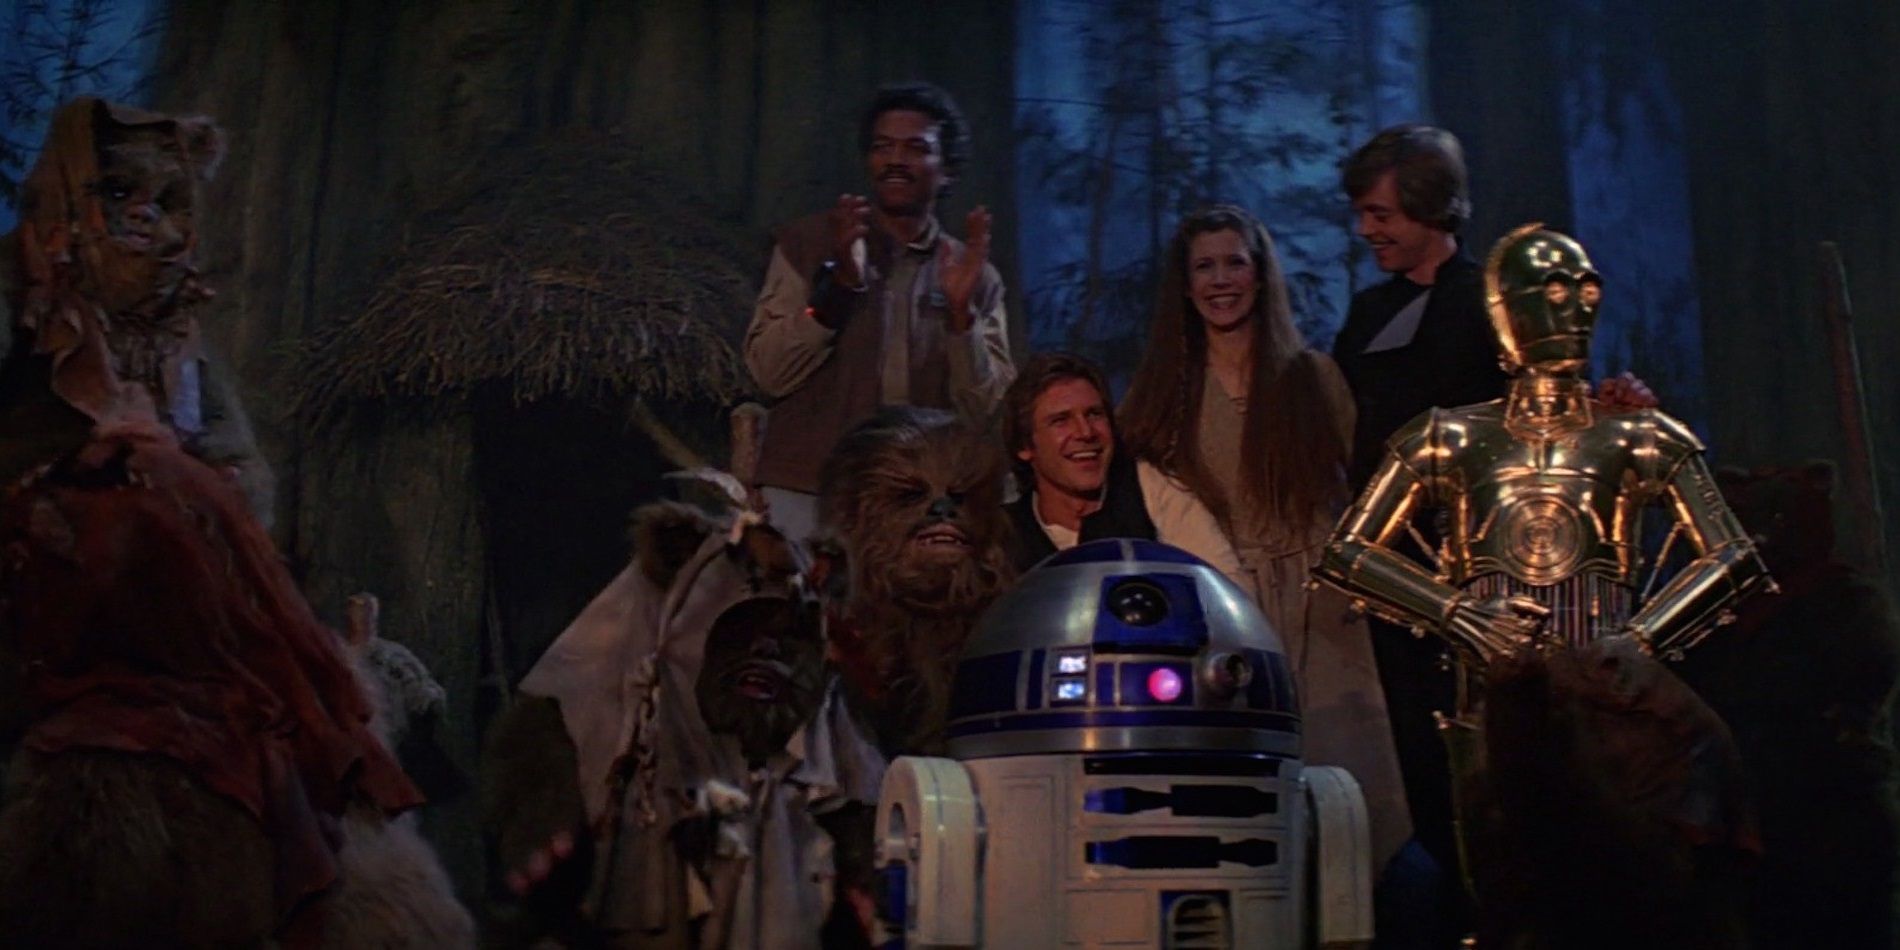 The party on Endor at the end of Return of the Jedi